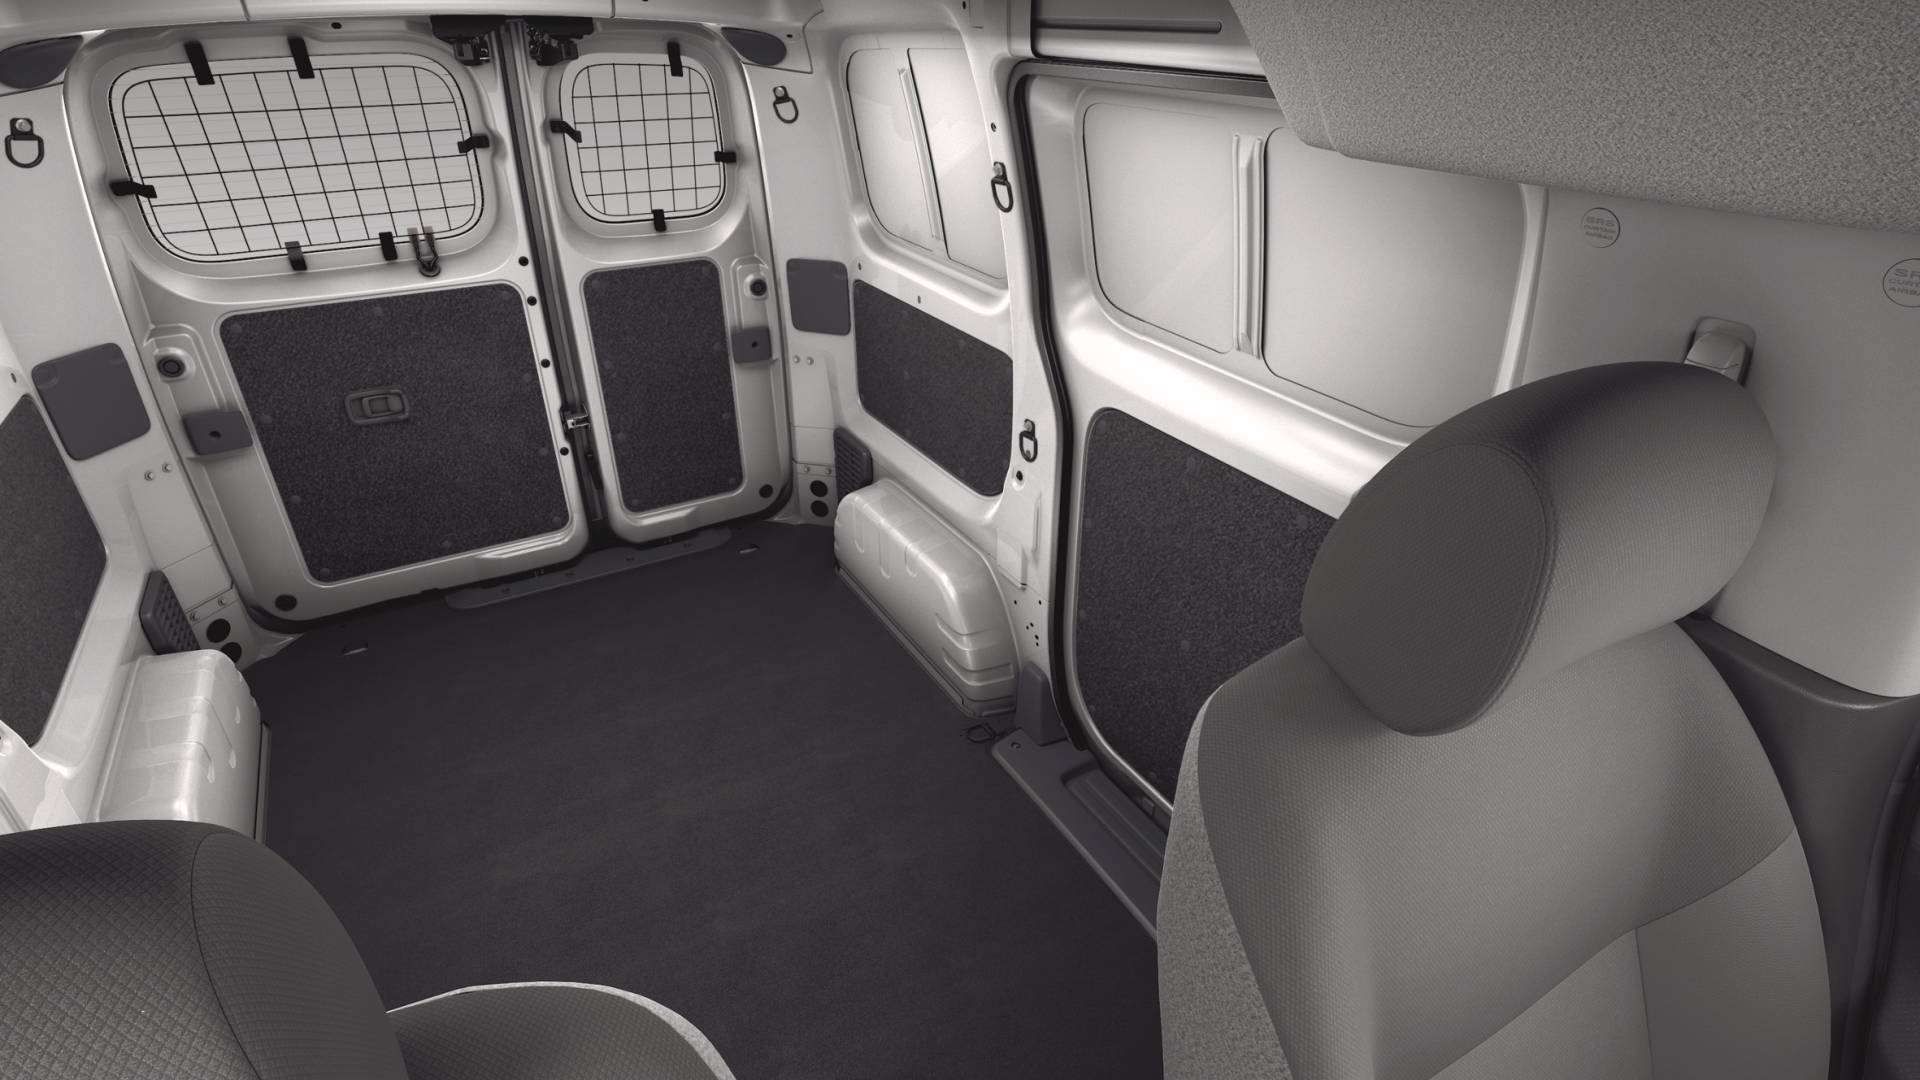 Connectivity Upgrades Raise 2020 Nissan NV200 Compact Cargo Prices By $530  | Carscoops